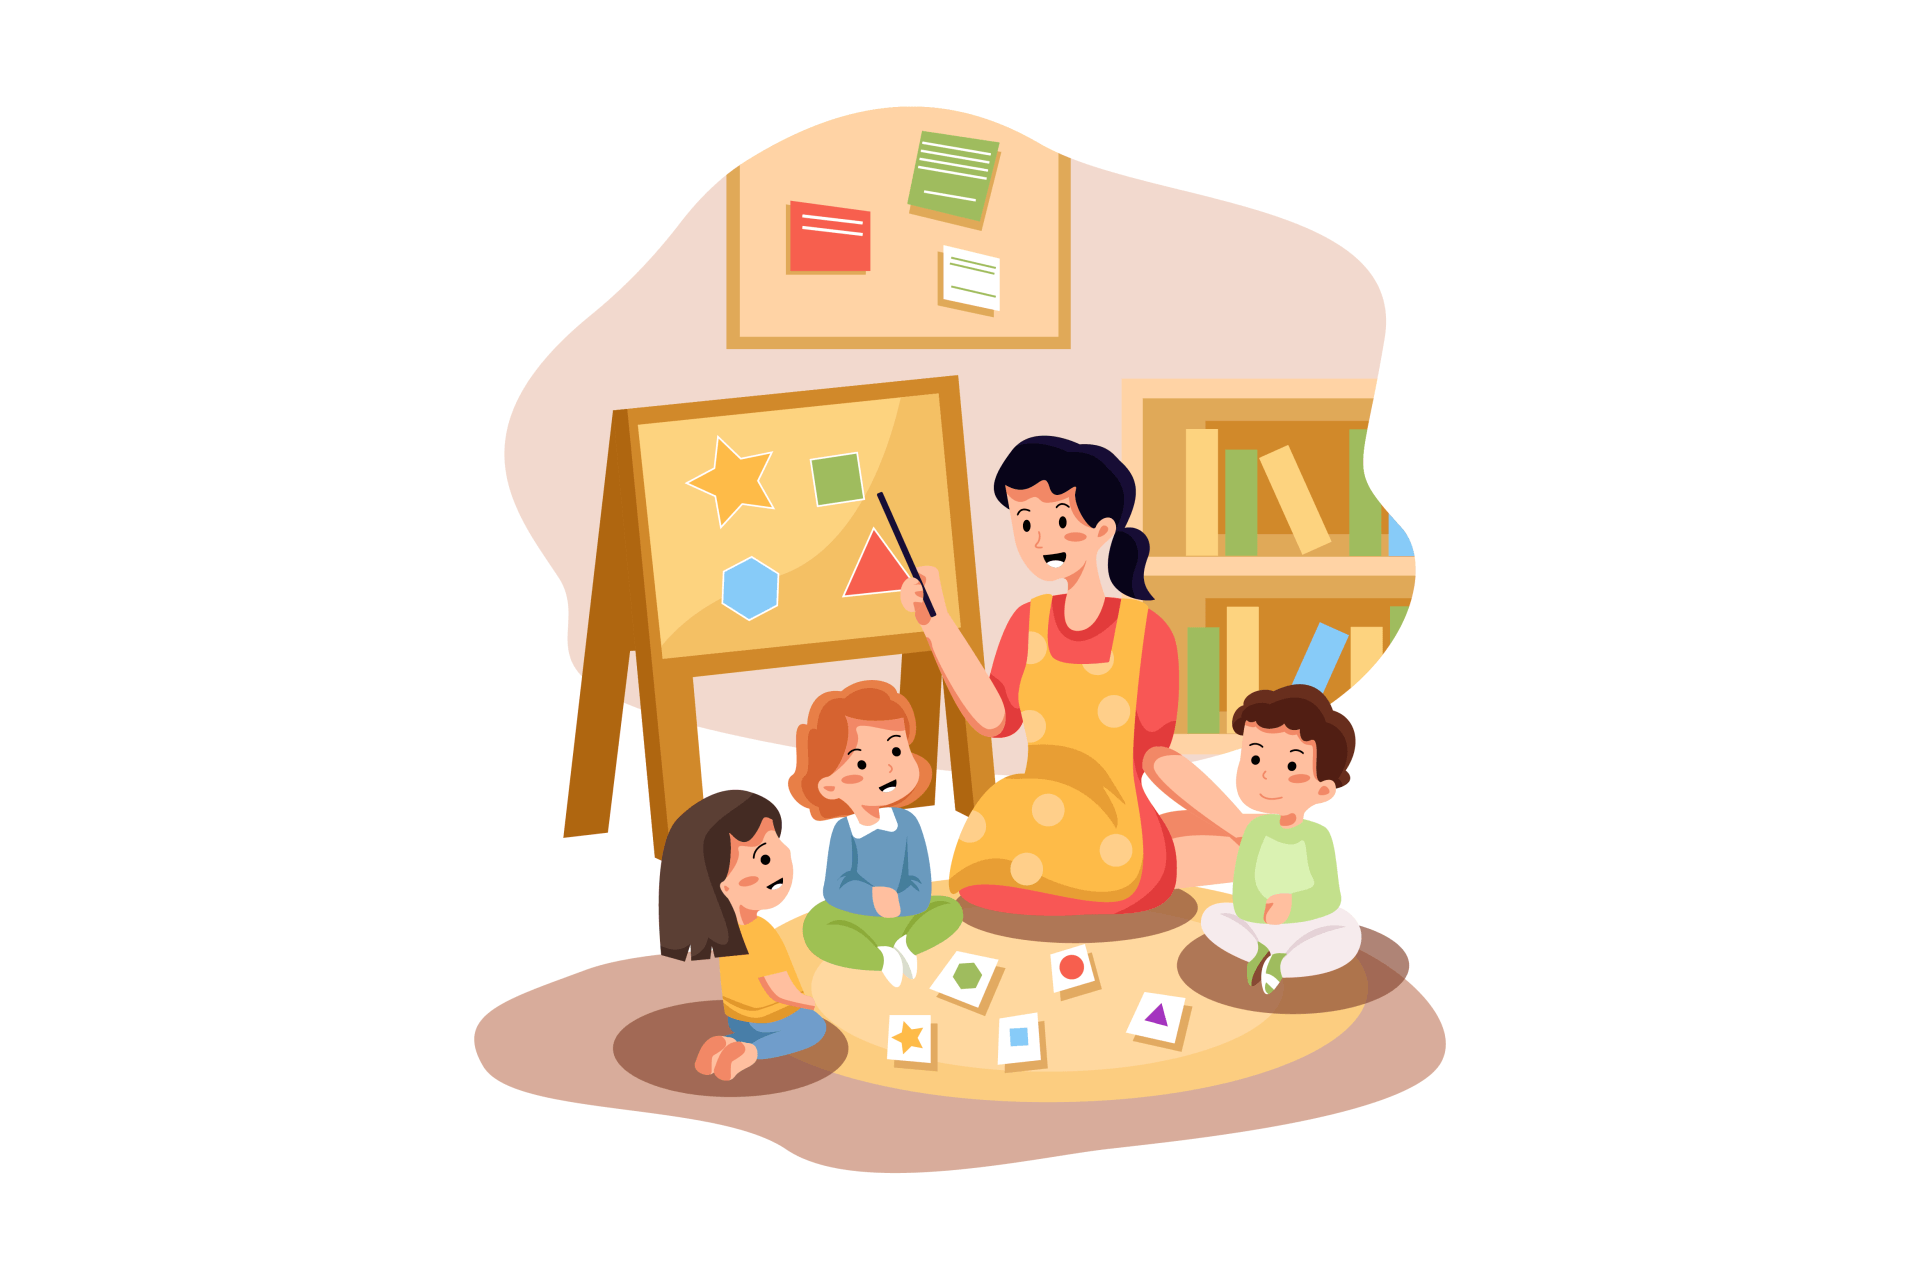 Cartoon illustration of teacher teaching her students about shapes